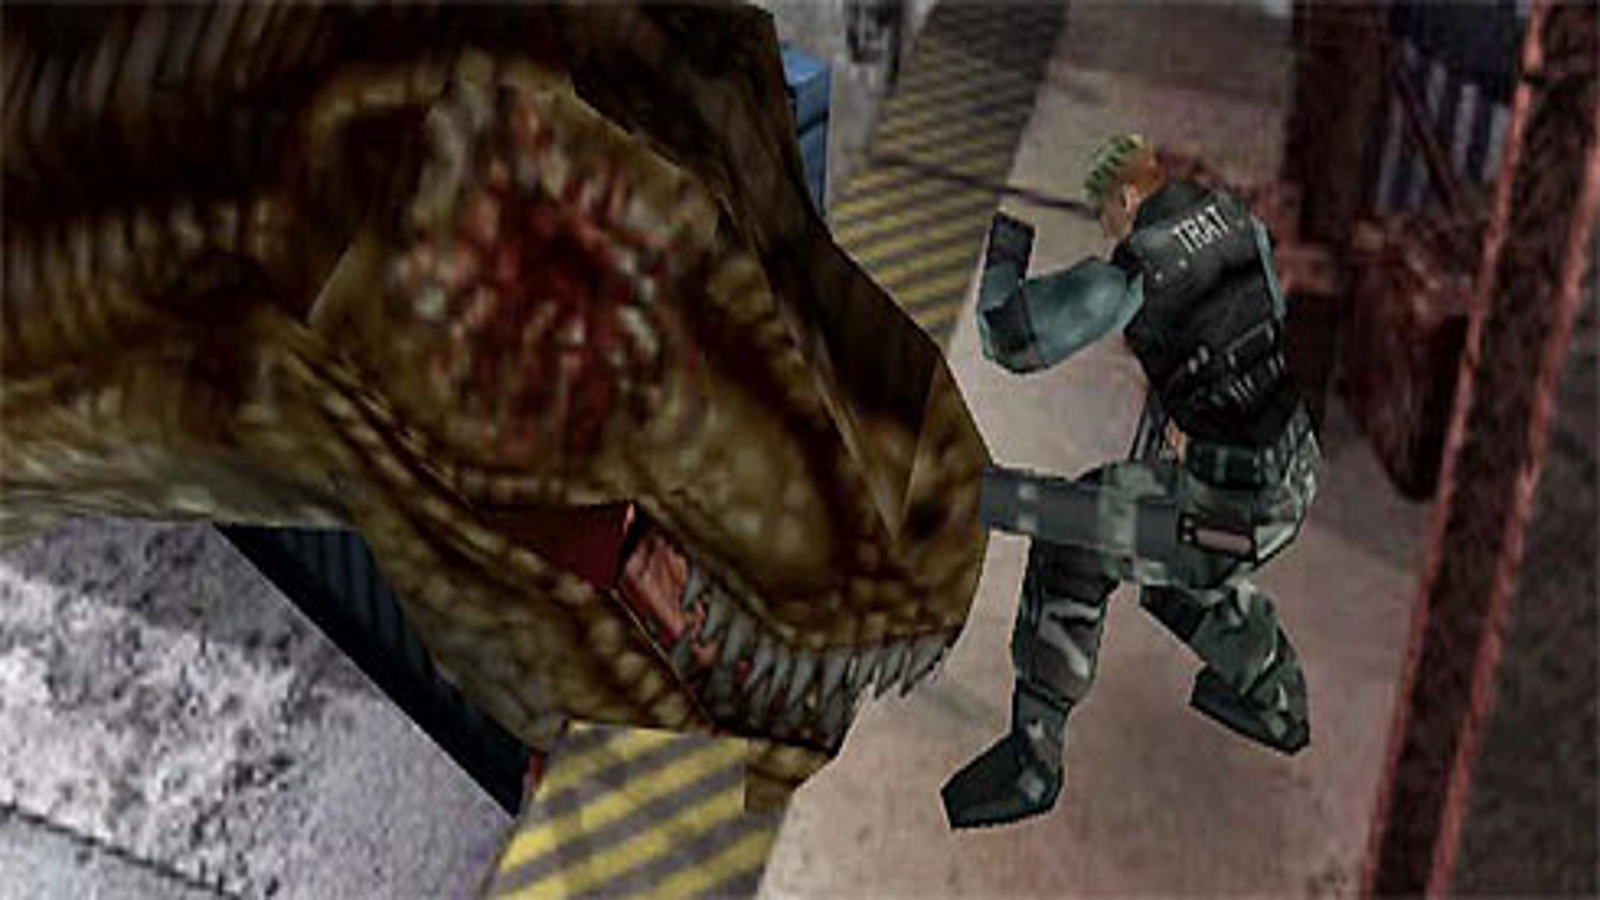 Exoprimal Review – Don't Call It A Dino Crisis